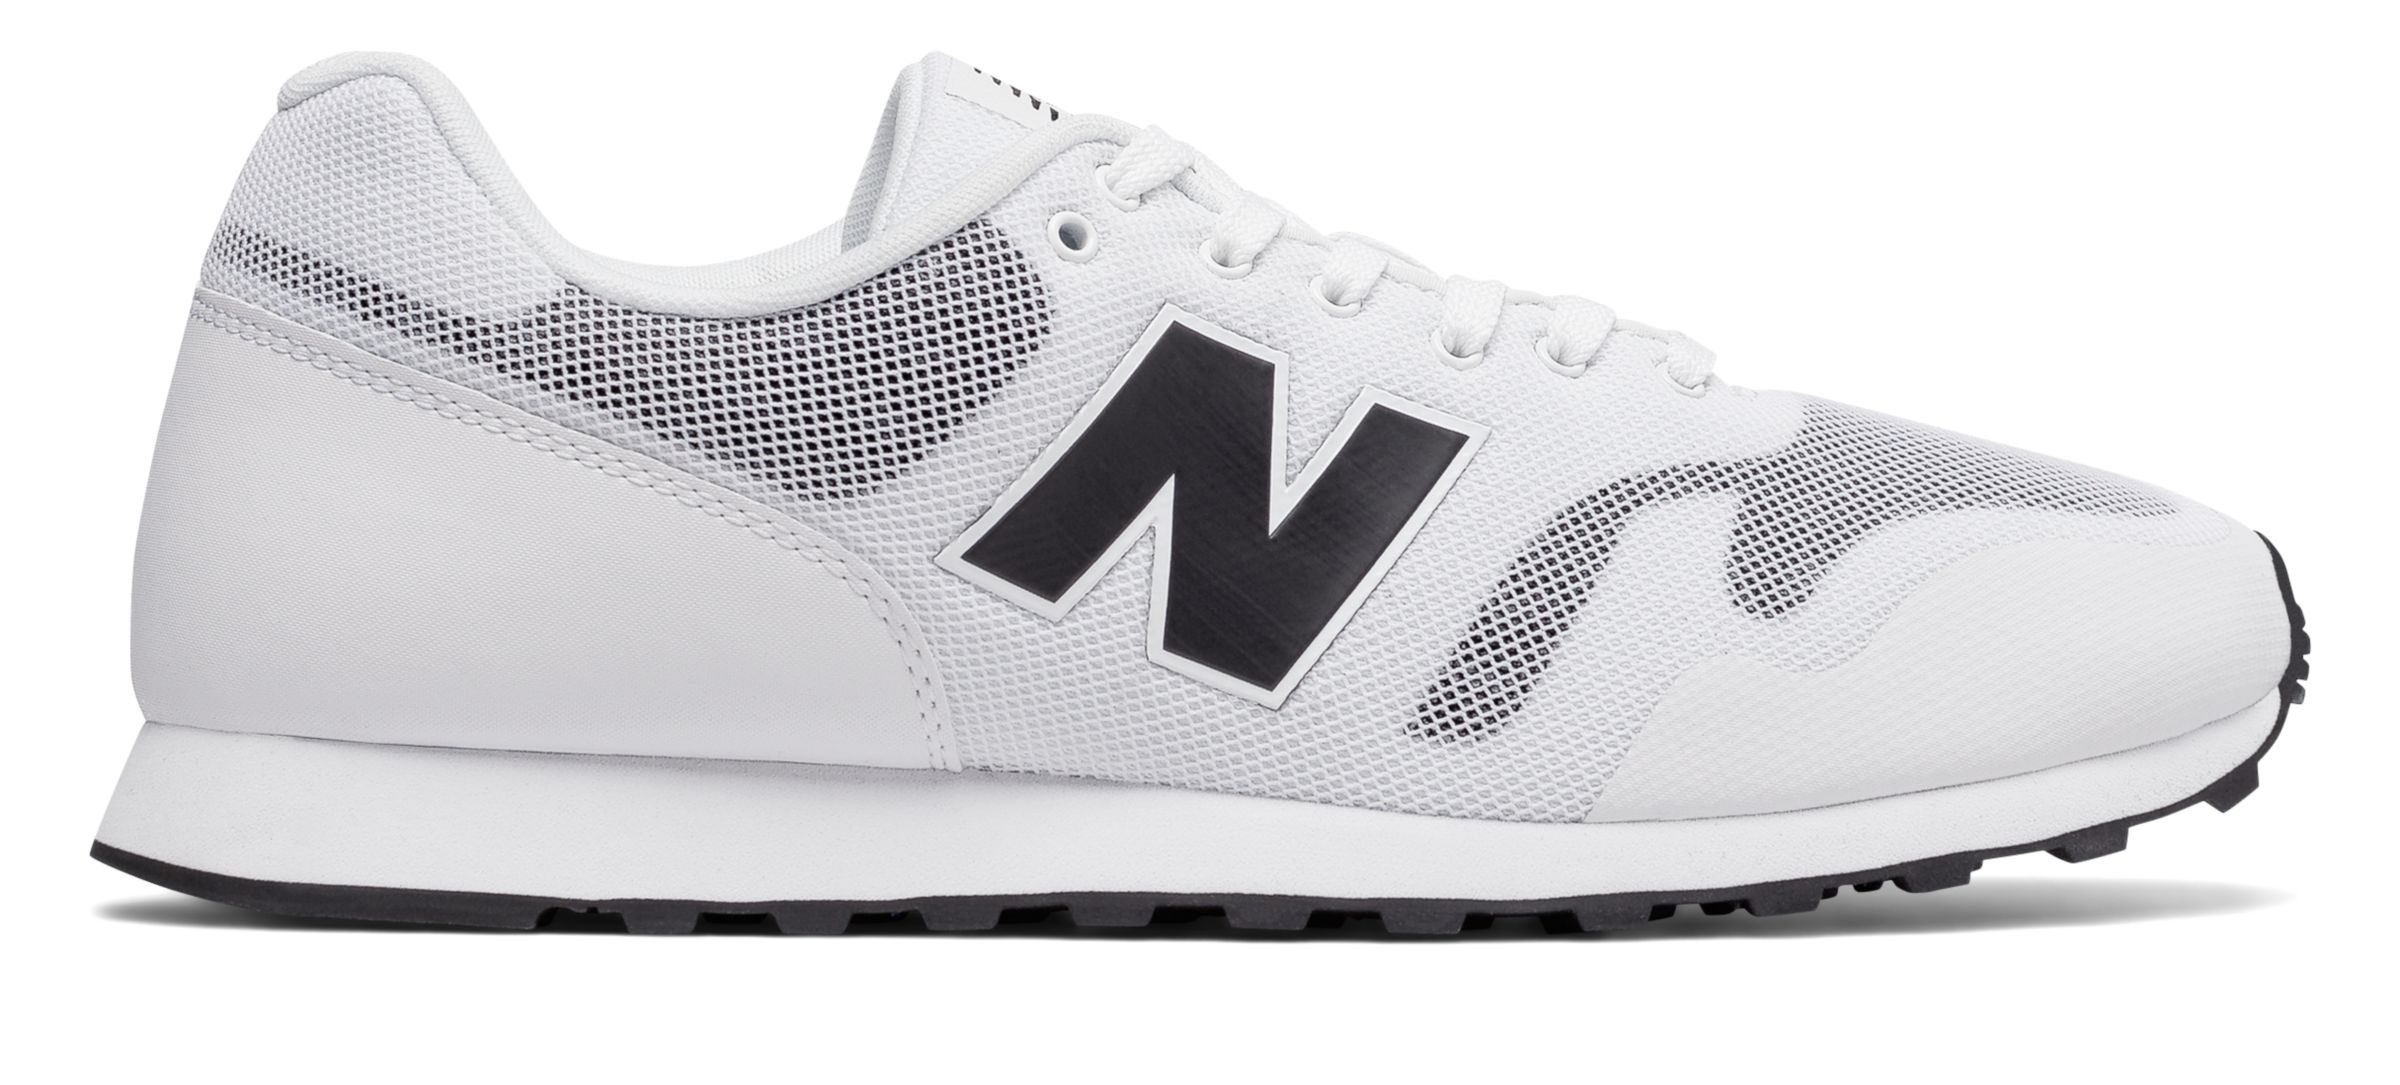 373 Search Results - 24 Results Found | New Balance UK